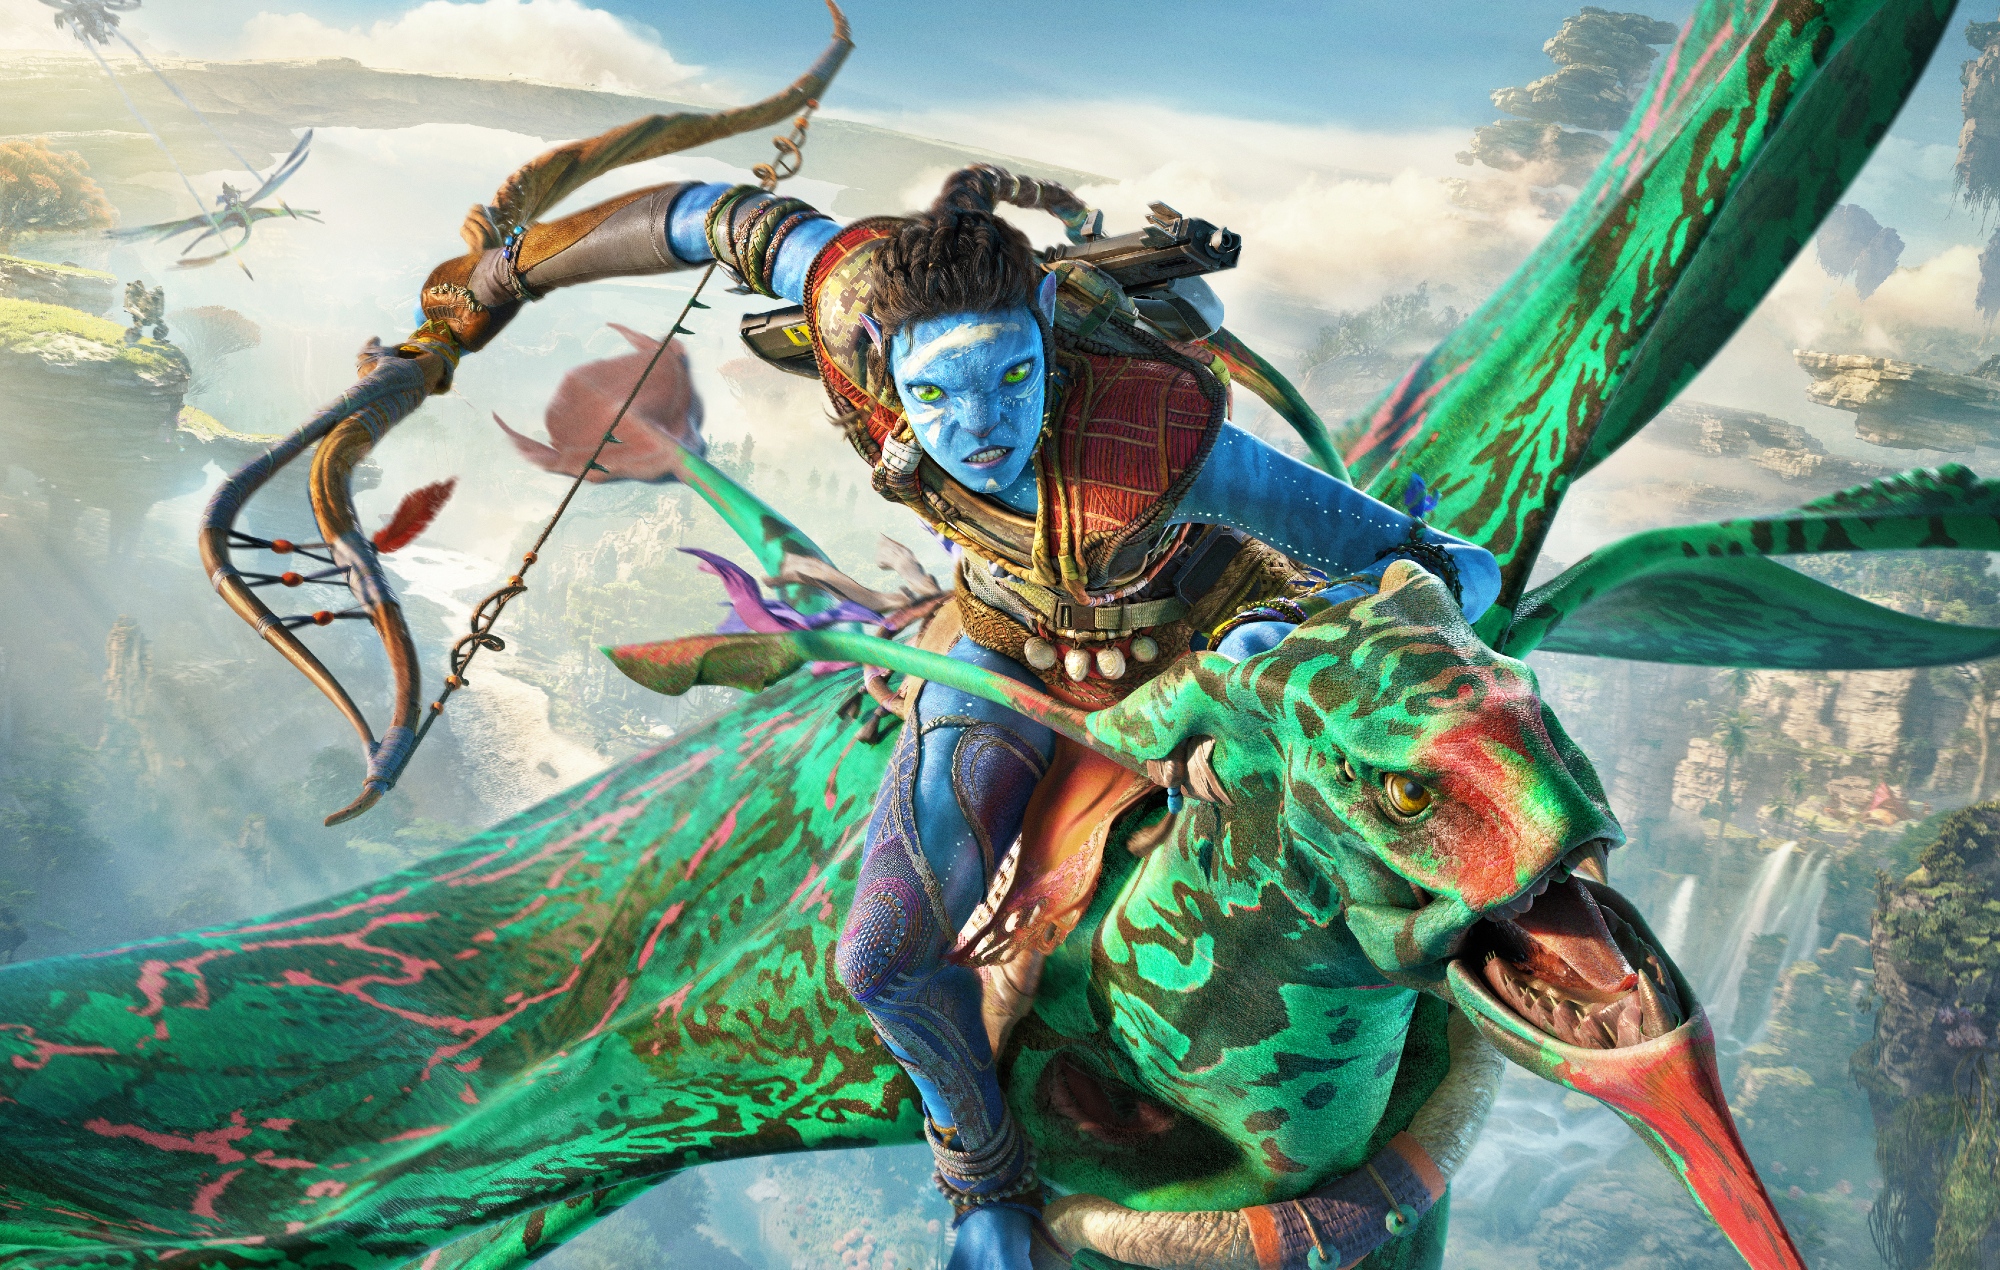 ‘Avatar: Frontiers Of Pandora’ puts a ‘Far Cry’ twist on James Cameron’s epic